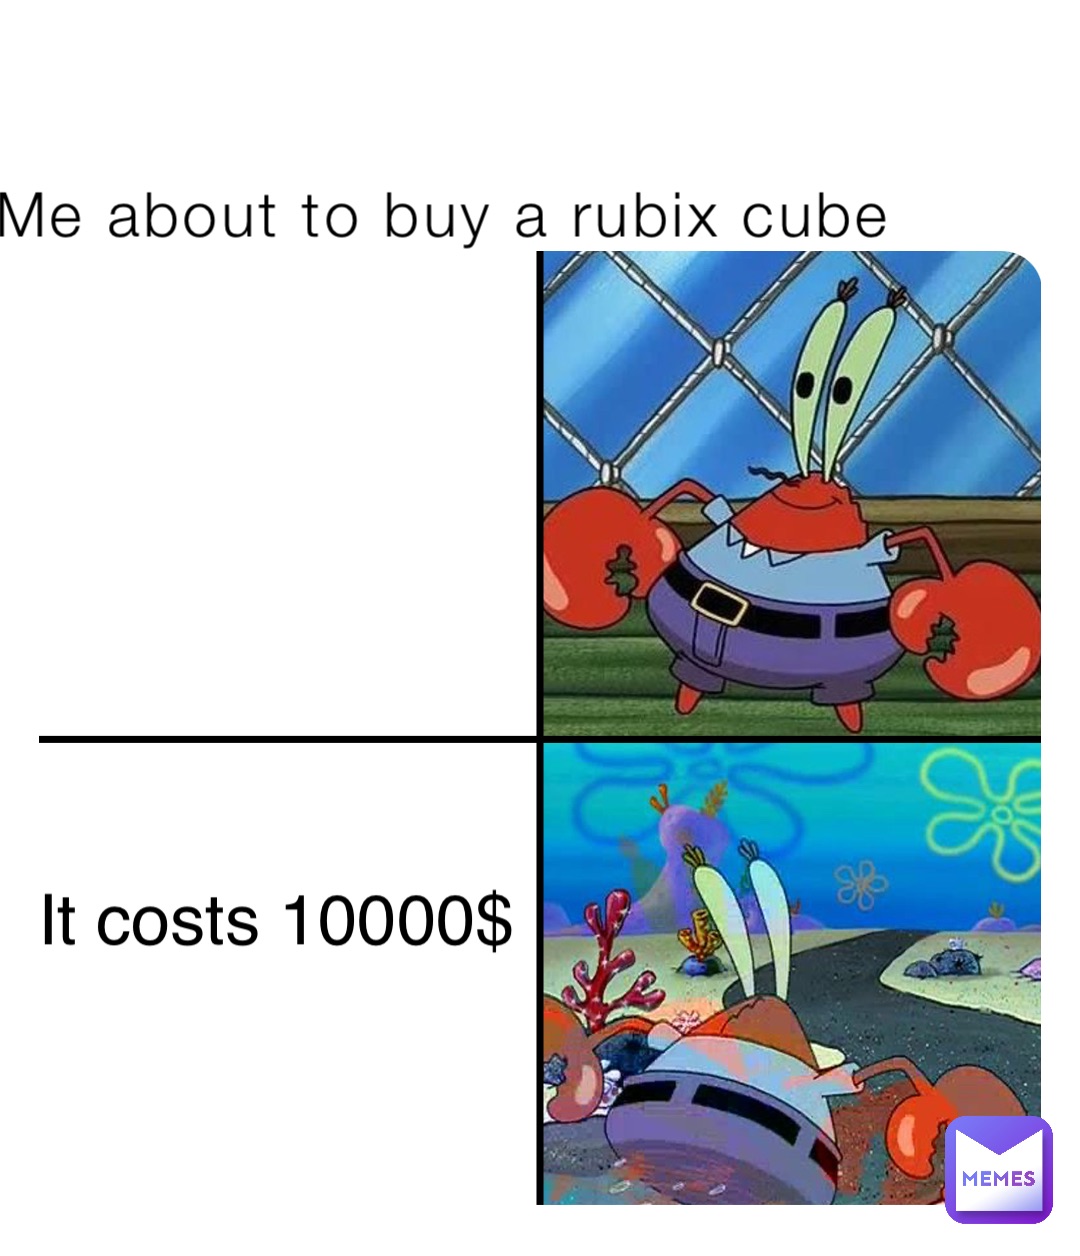 Me about to buy a rubix cube It costs 10000$